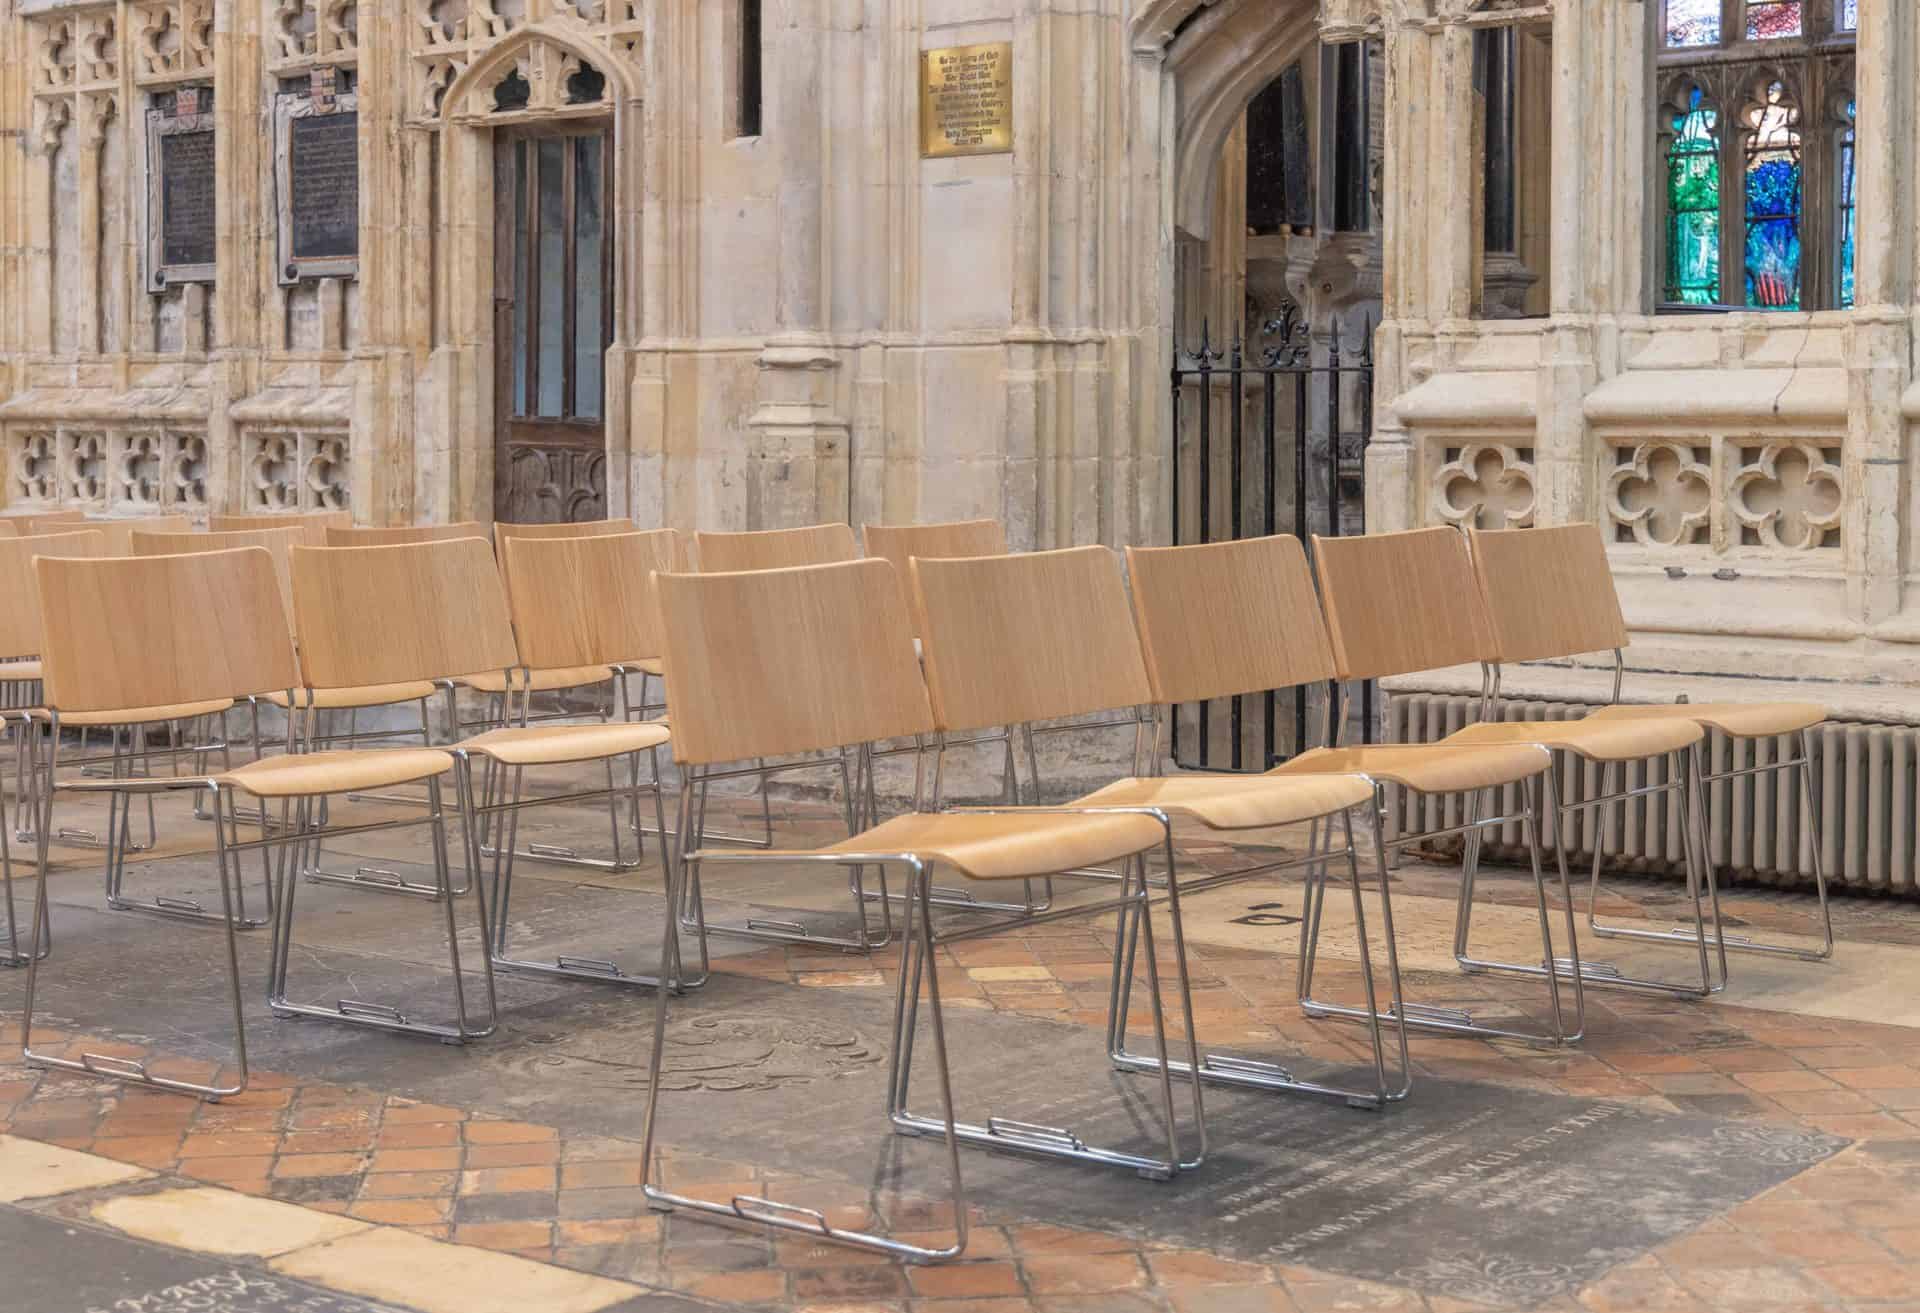 Rows of abbey chairs at gloucester cathedral